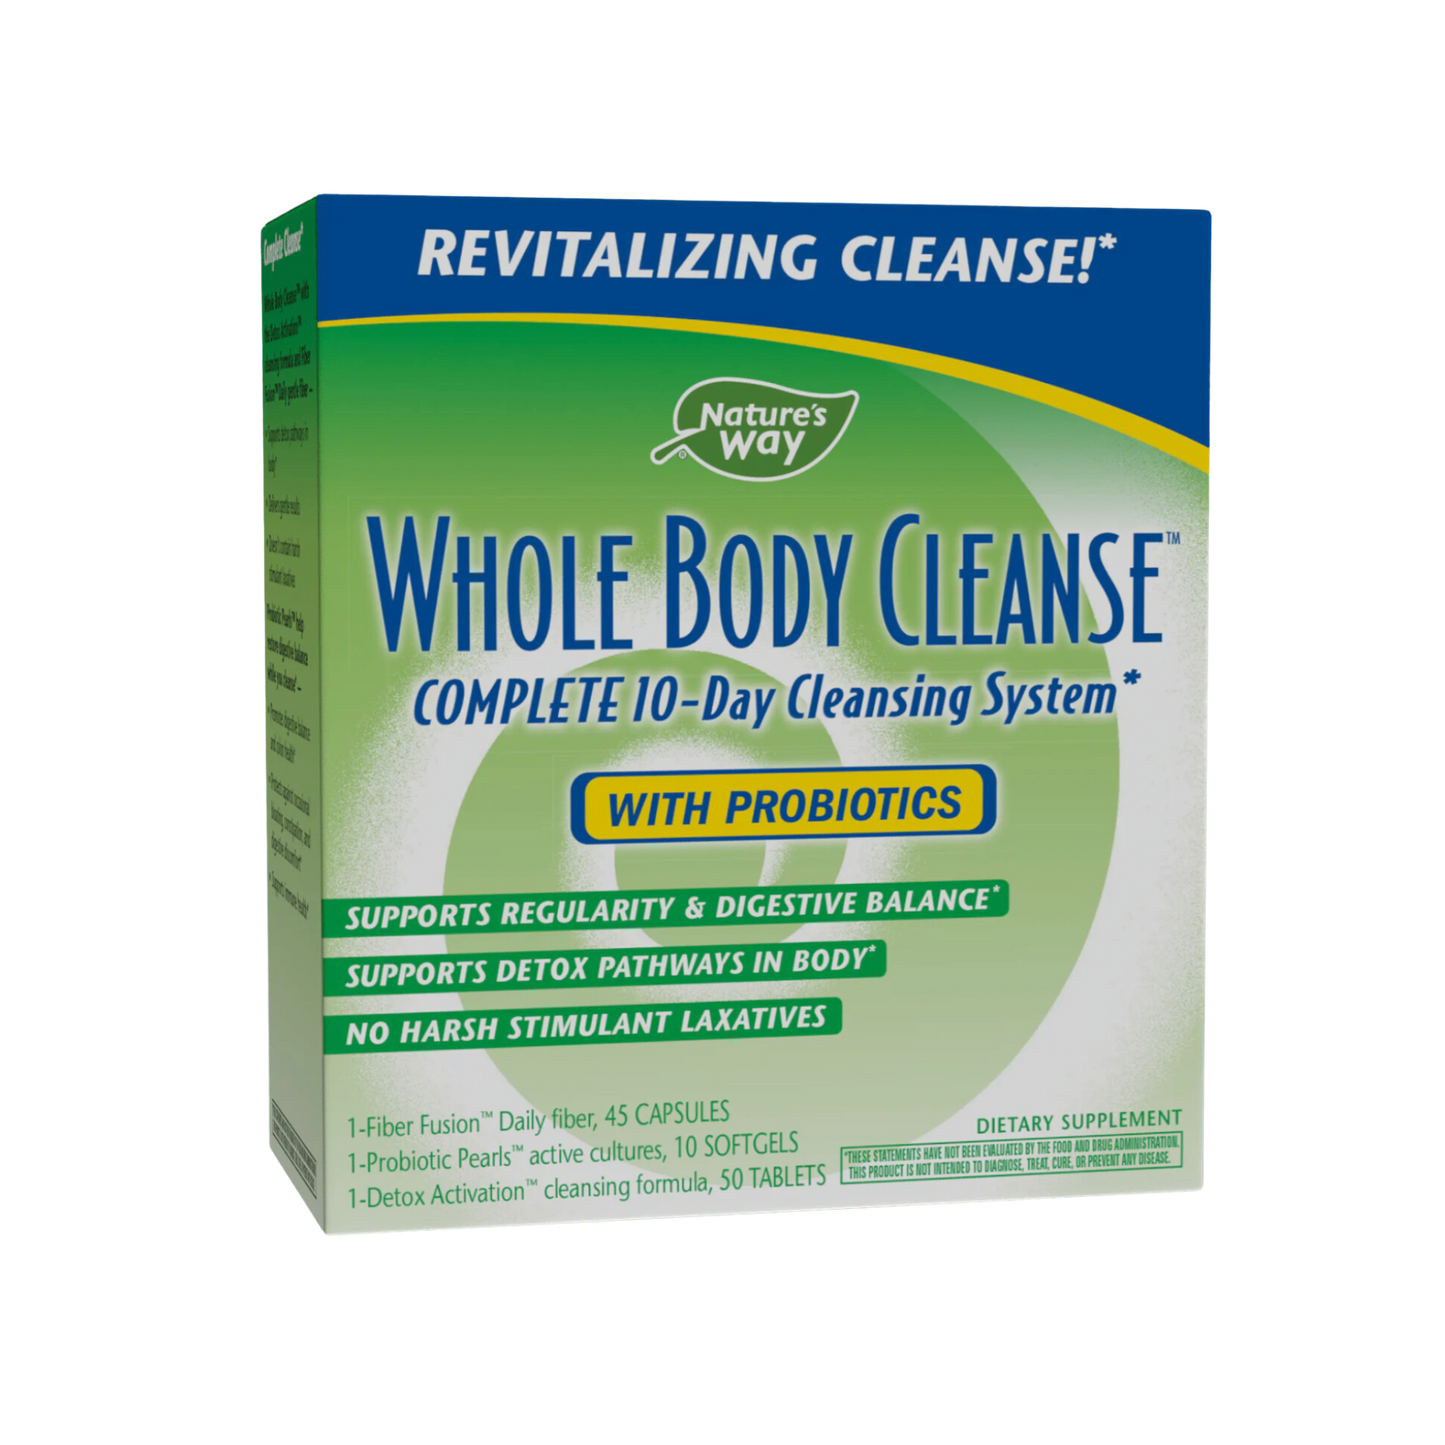 Nature's Way Whole Body Cleanse Kit